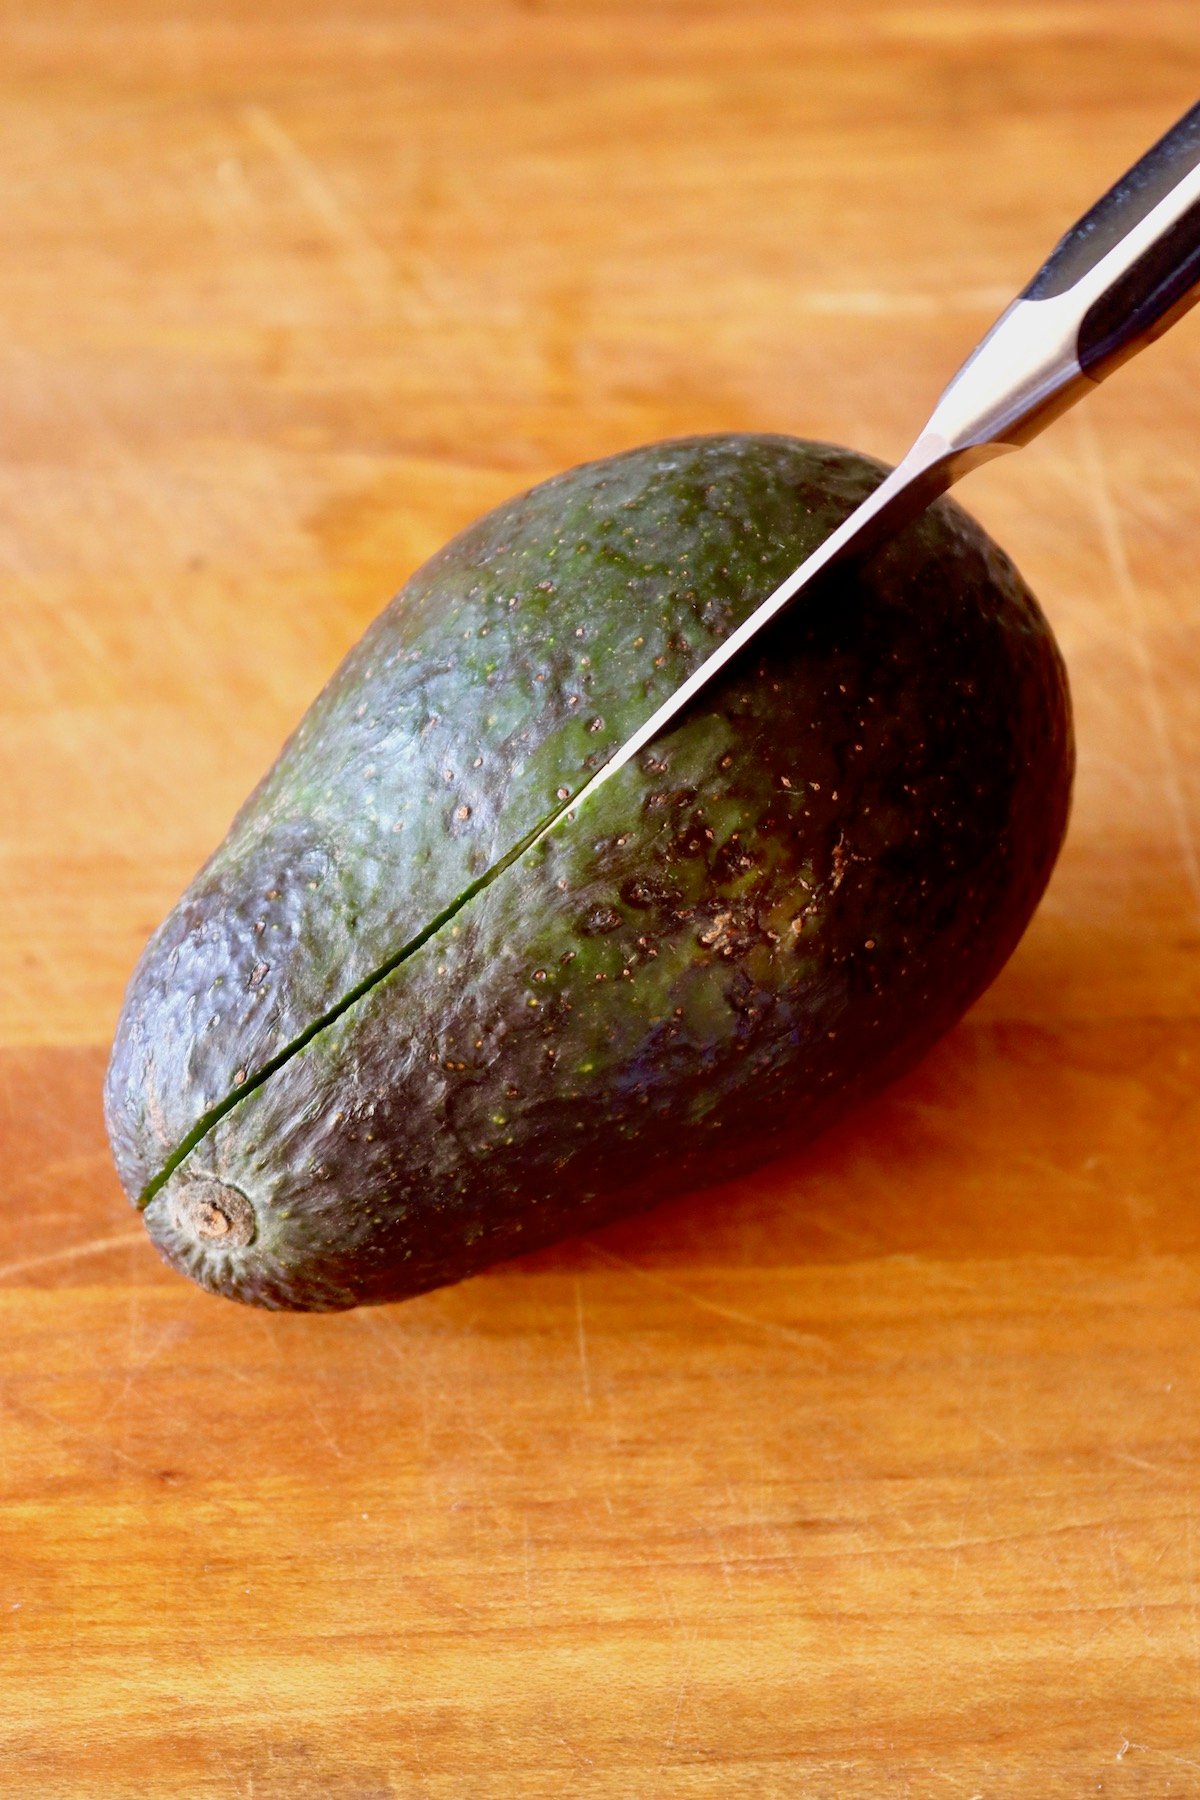 Avocado with a paring knife slicing it in half on wood cutting board.